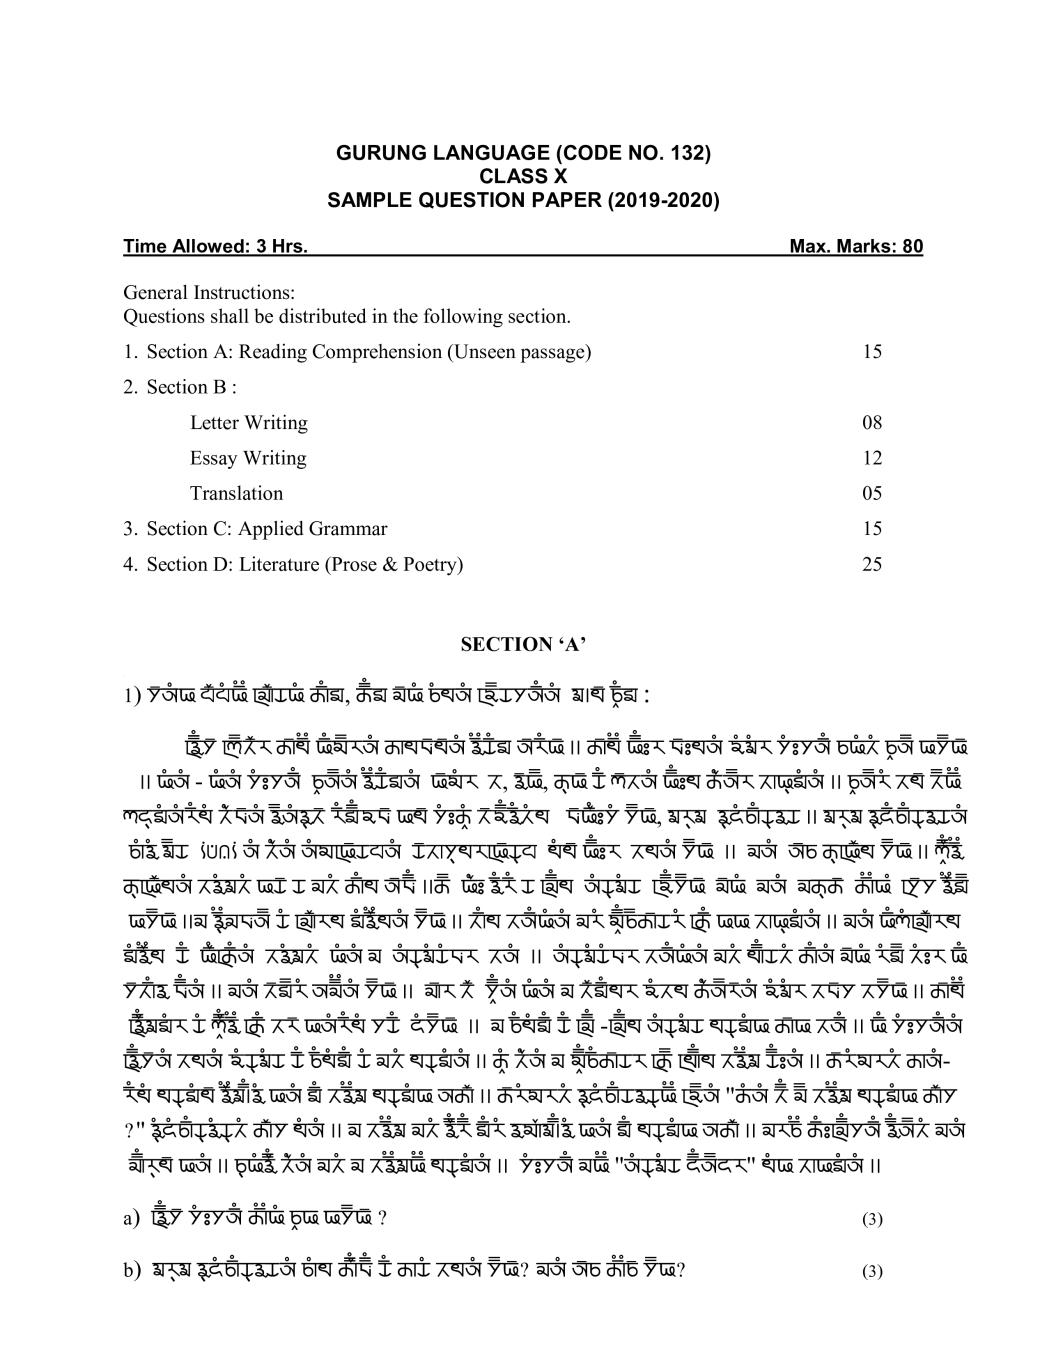 CBSE Class 10 Sample Paper 2020 for Gurung - Page 1